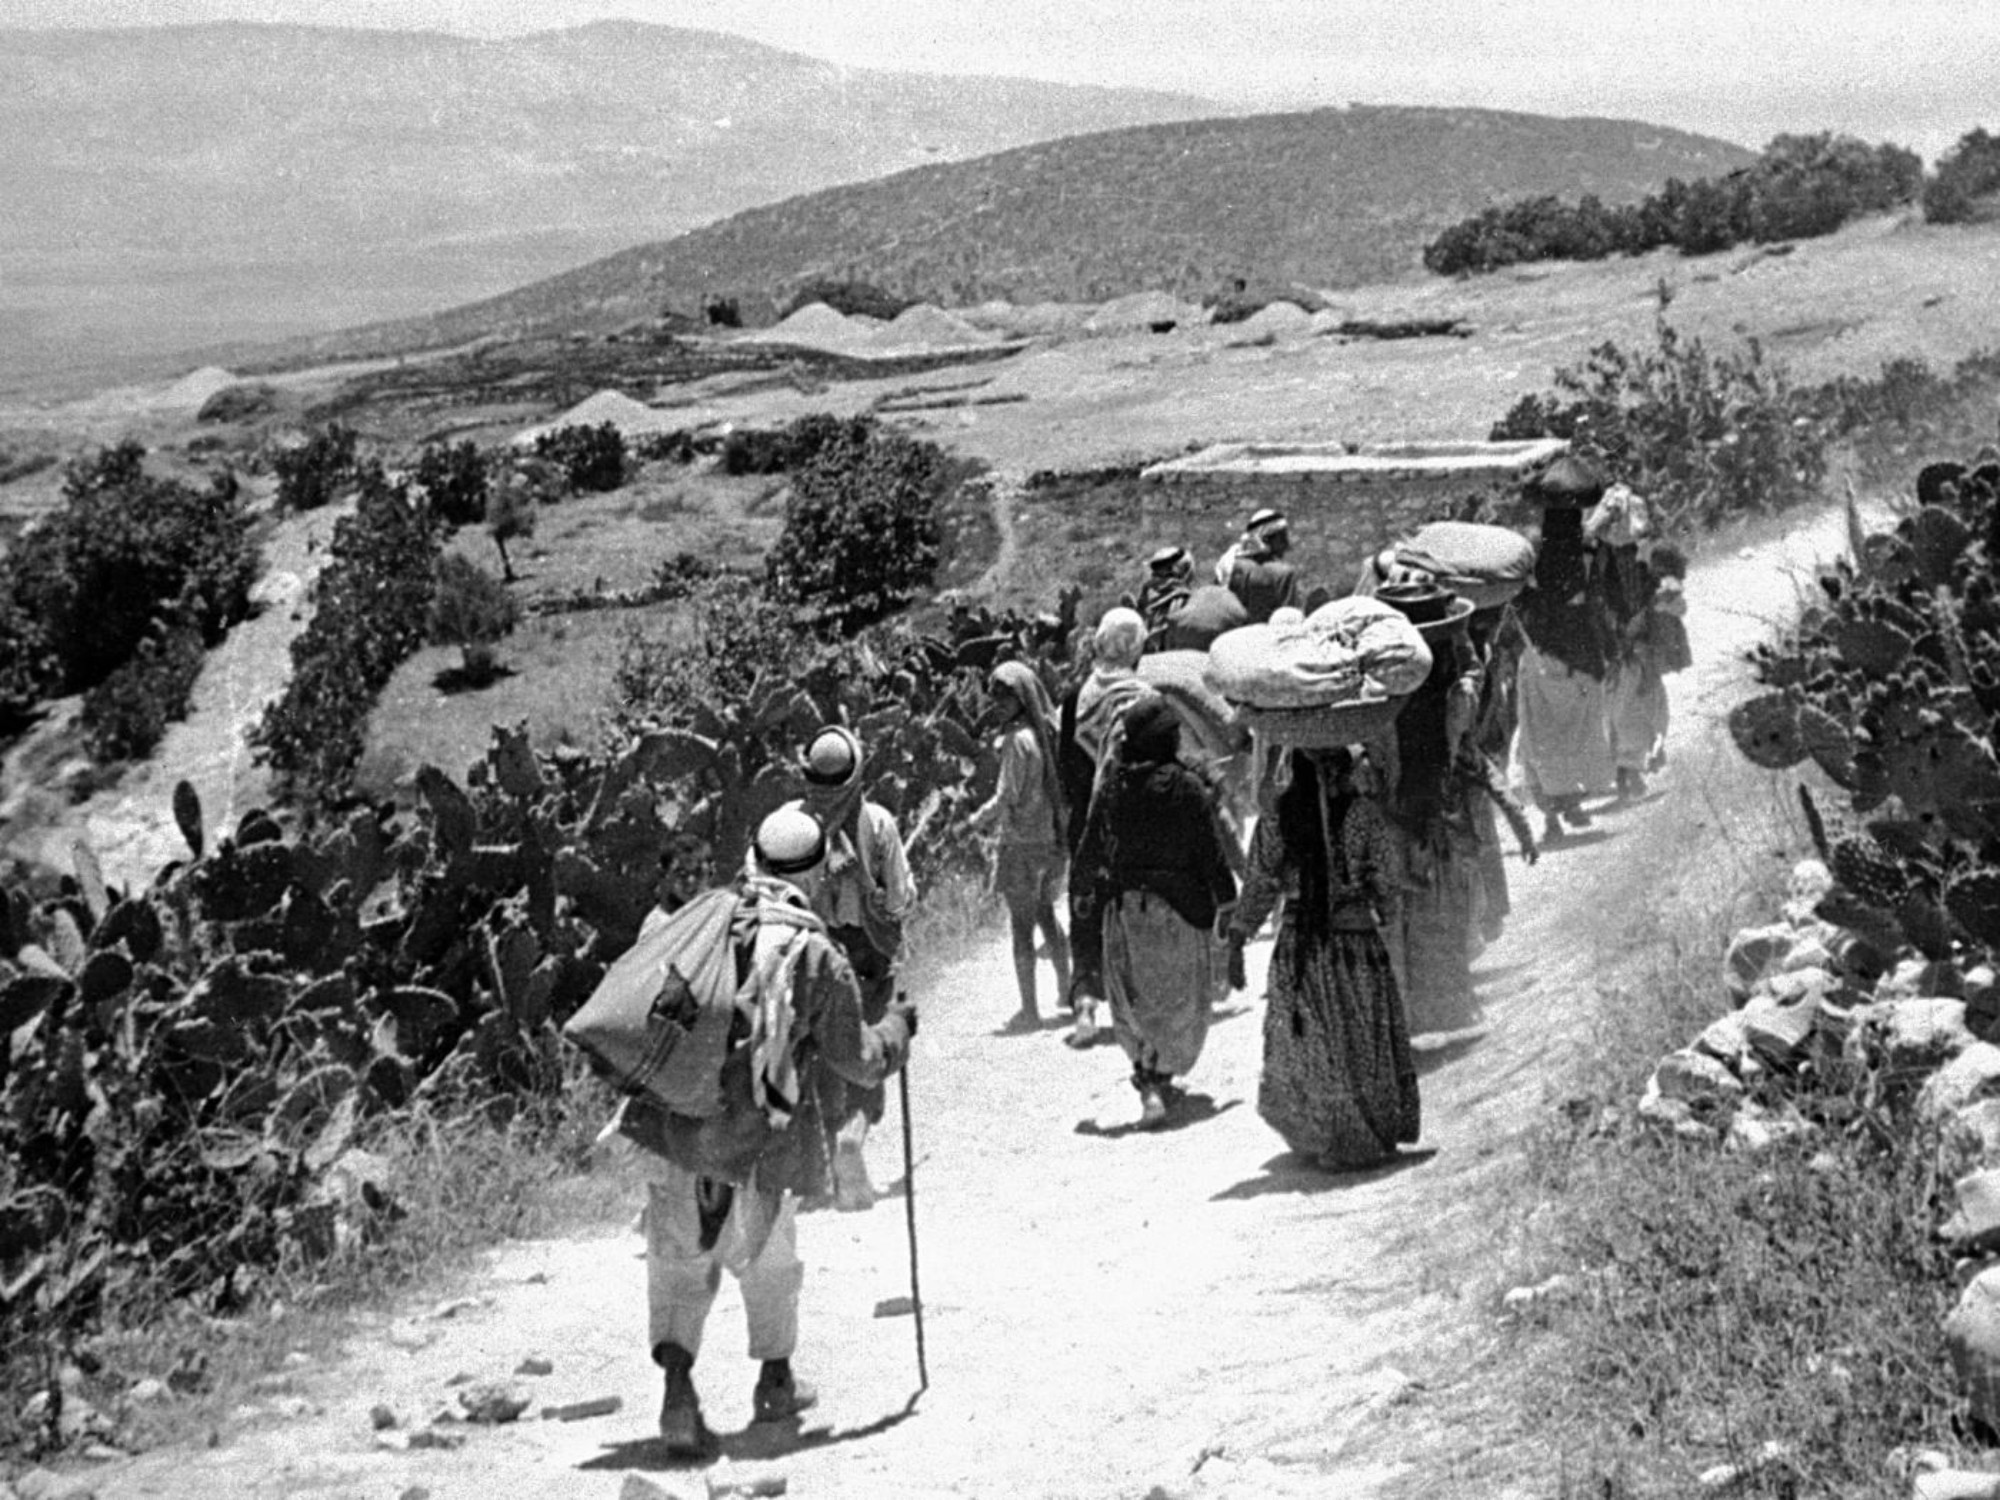 Palestinians flee the village of Qumiya during the Nakba in 1948 (Archive/Palestine Remembered)